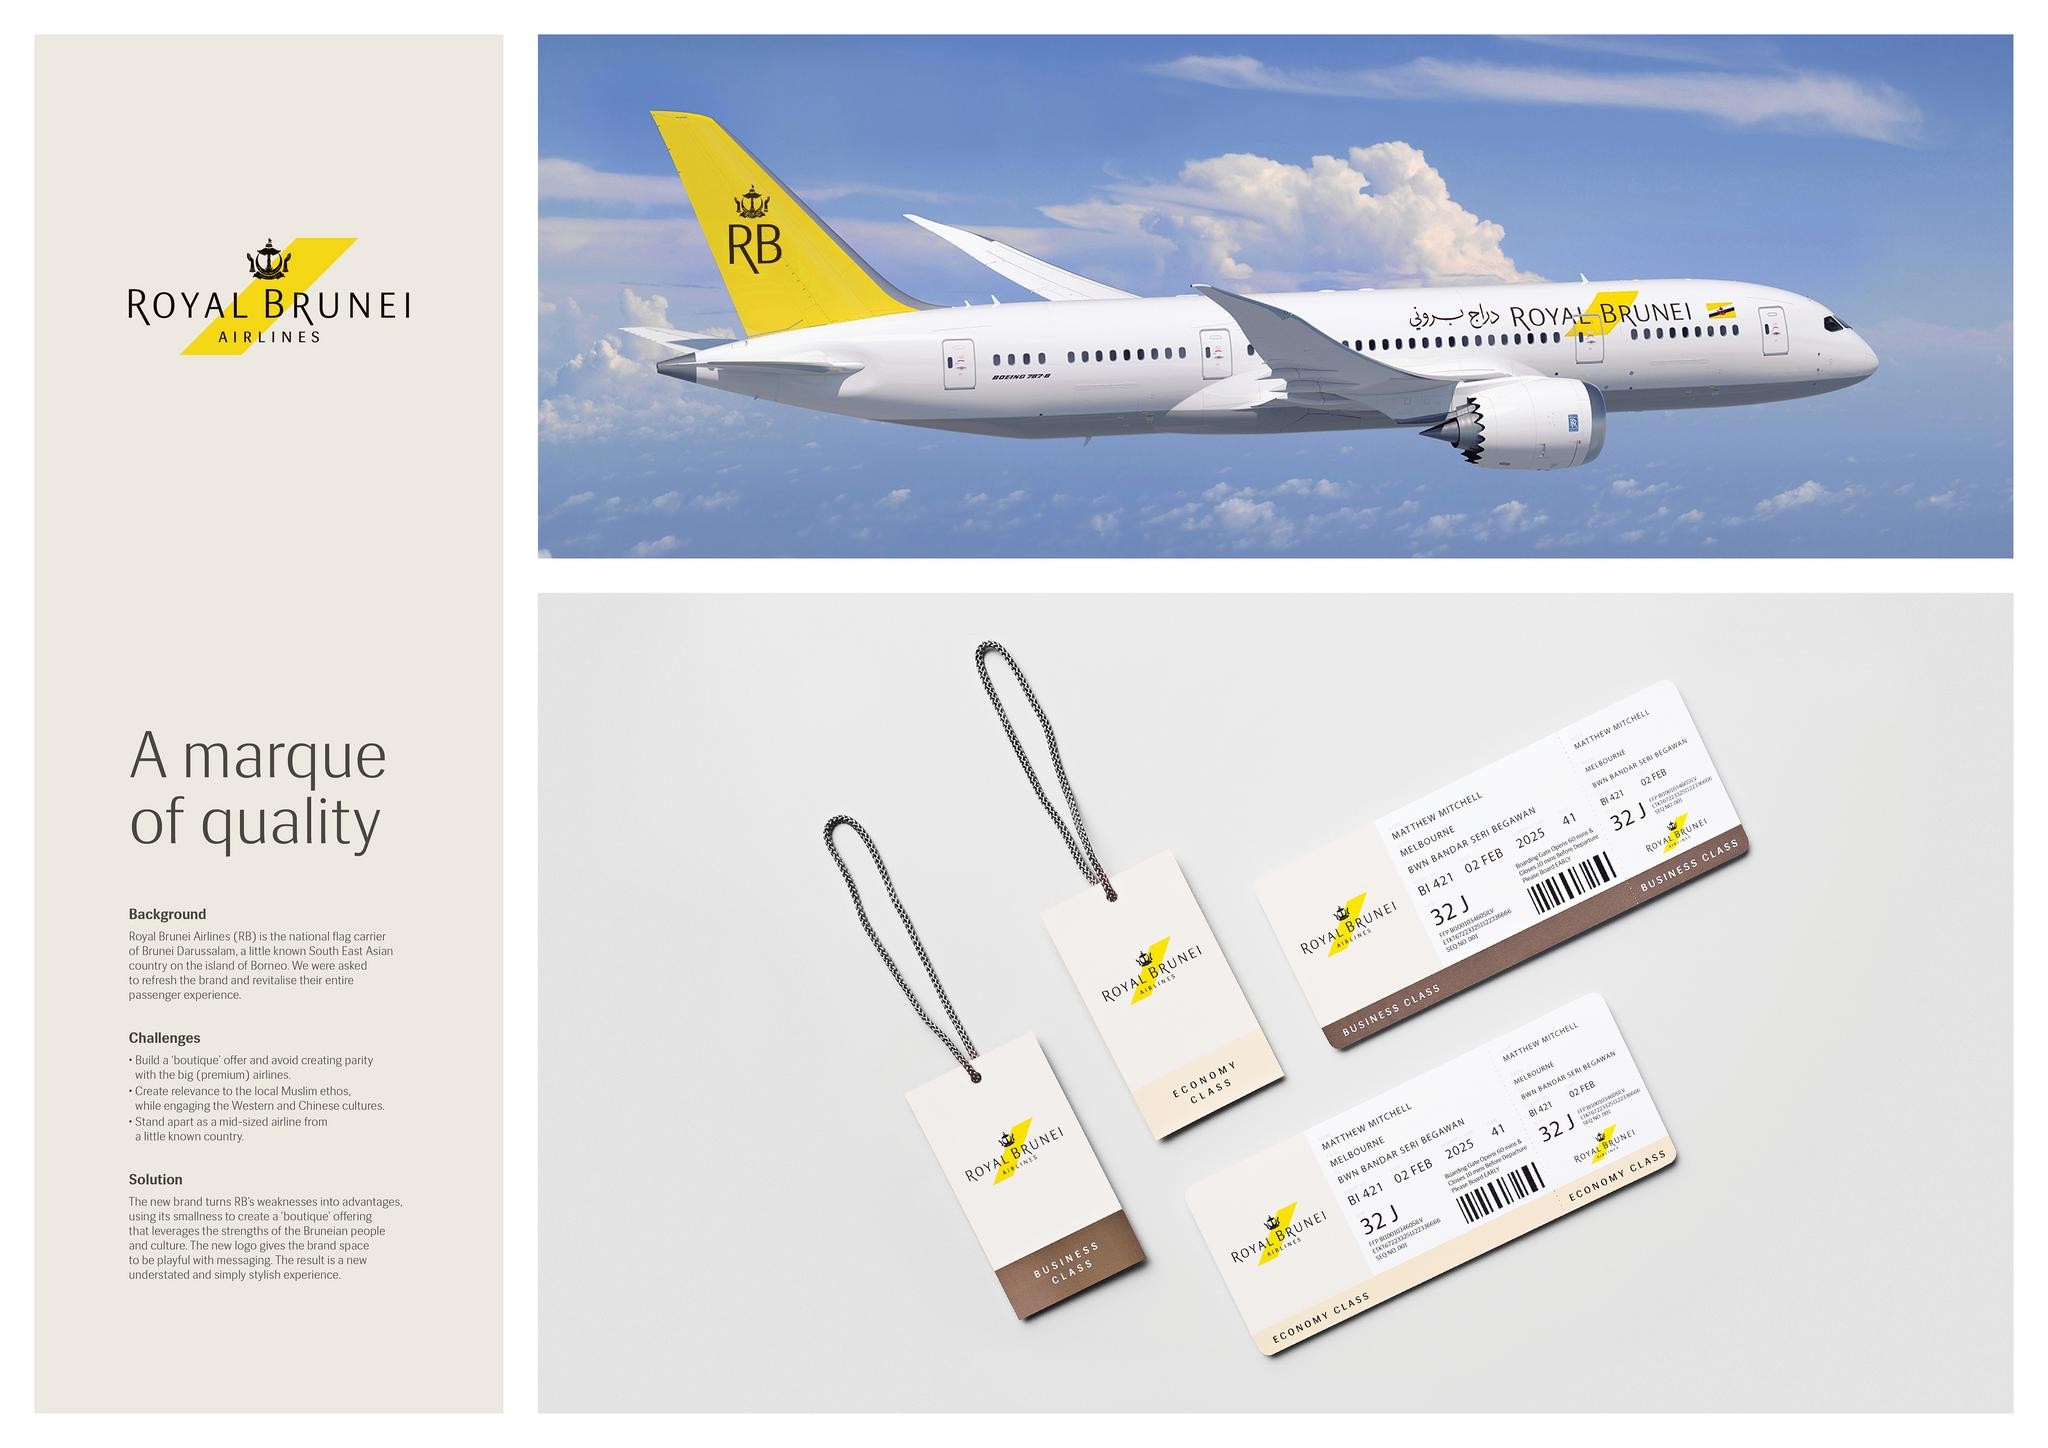 ROYAL BRUNEI AIRLINES – NATIONAL CARRIER OF BRUNEI